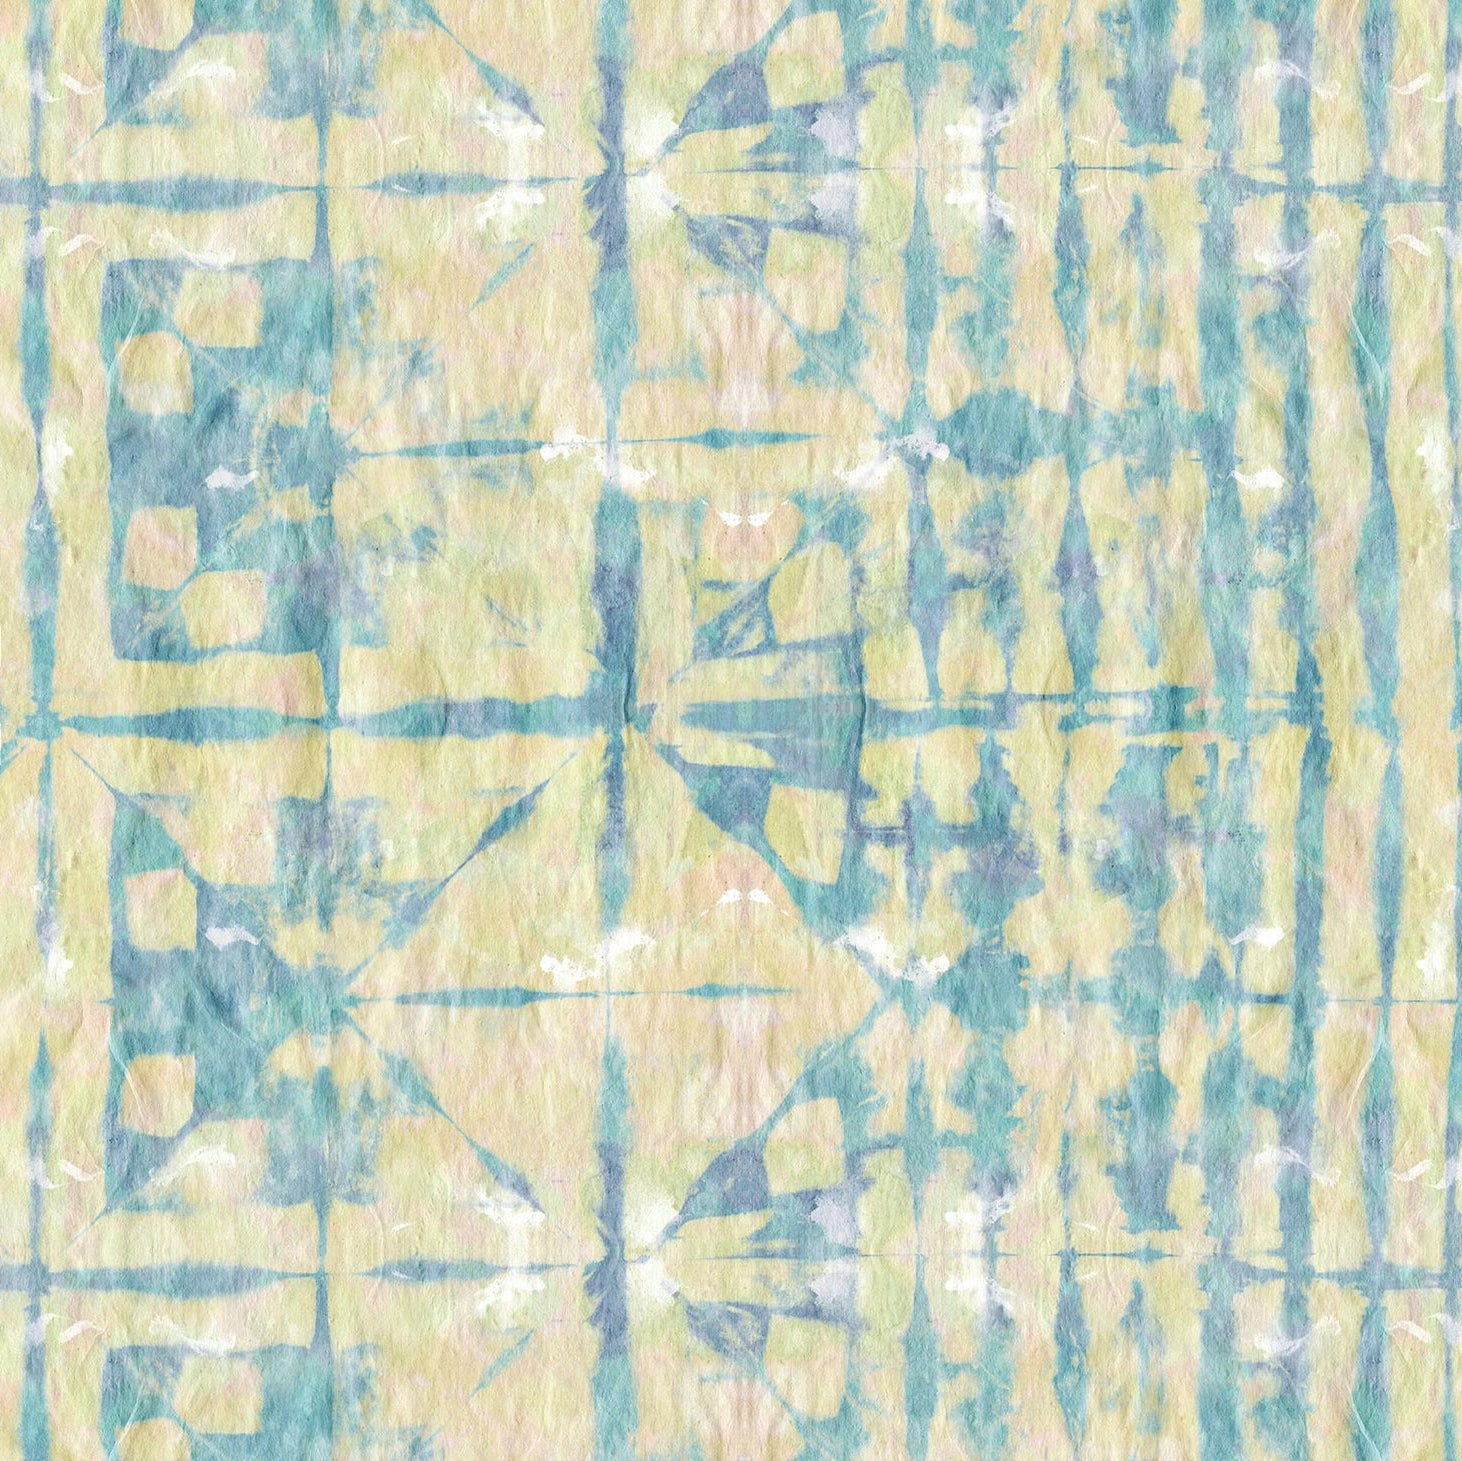 Detail of wallpaper in an abstract dyed grid print in mottled yellow, blue and white.